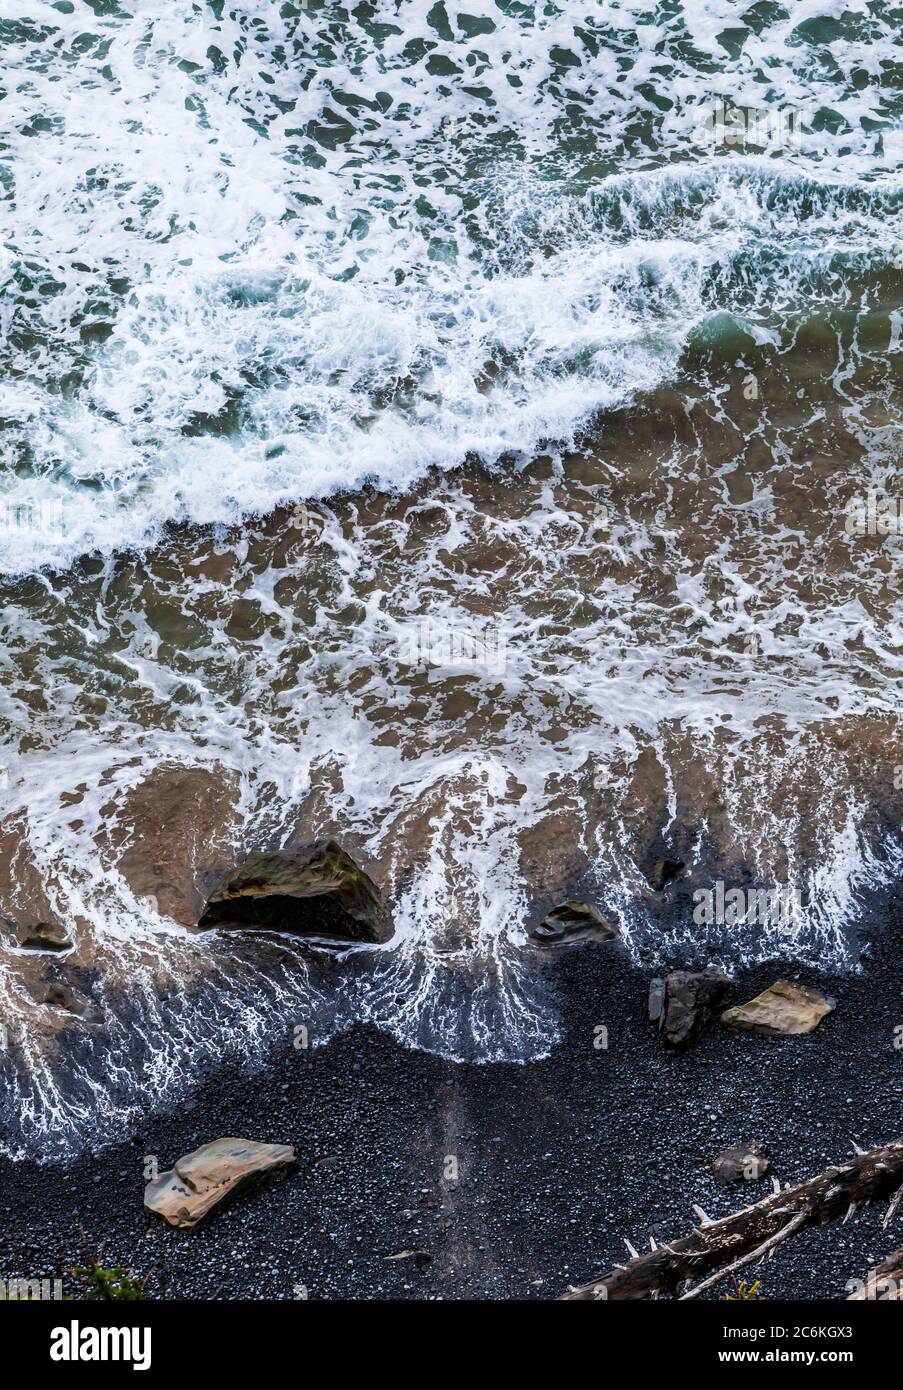 Looking down on waves as they come ashore, Ecola State Park, Oregon, USA. Stock Photo